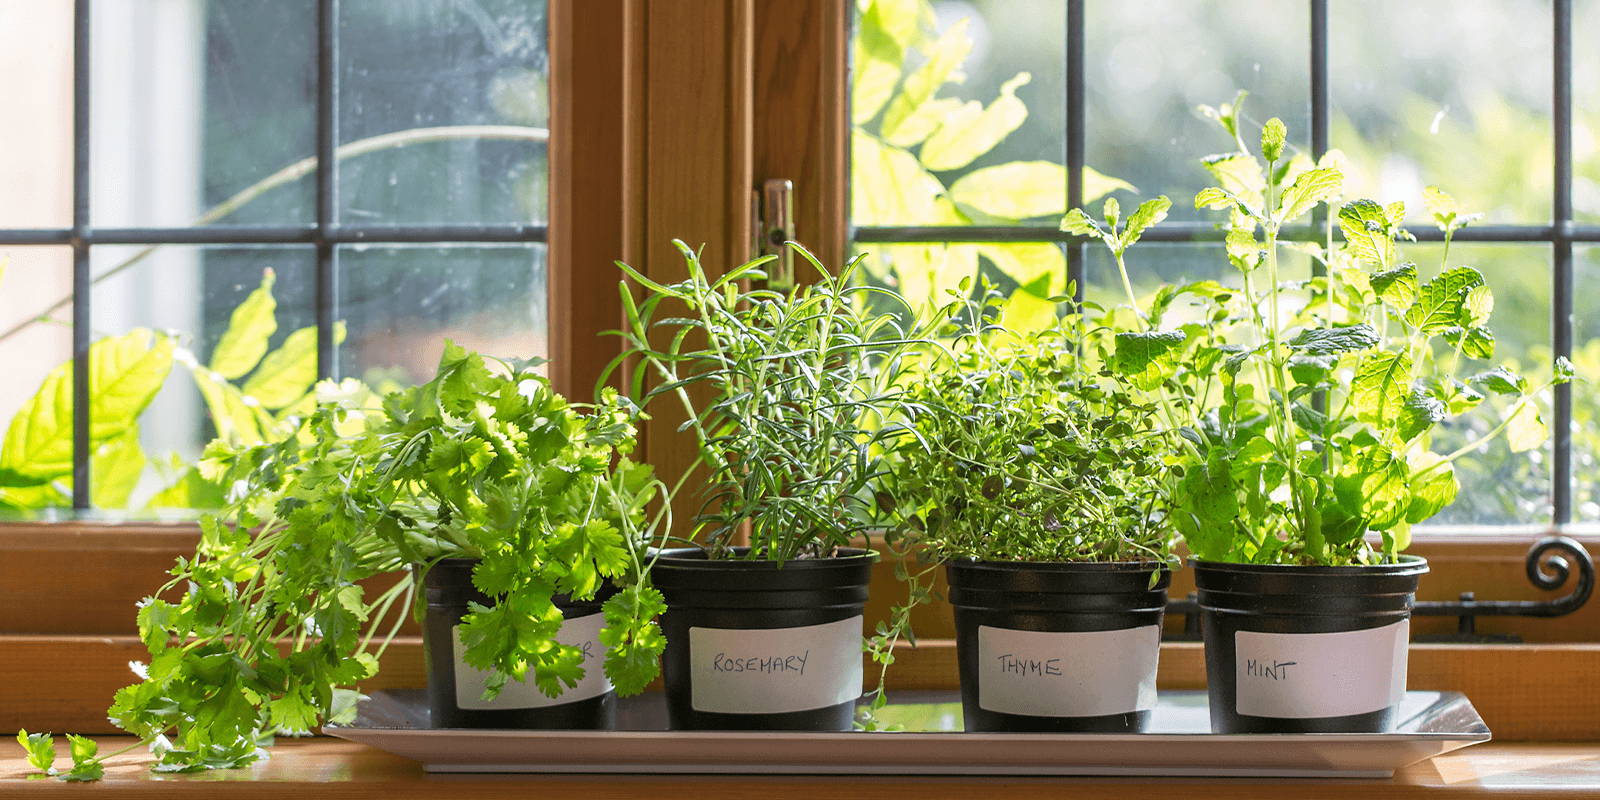 Potted herbs growing in windowsill.